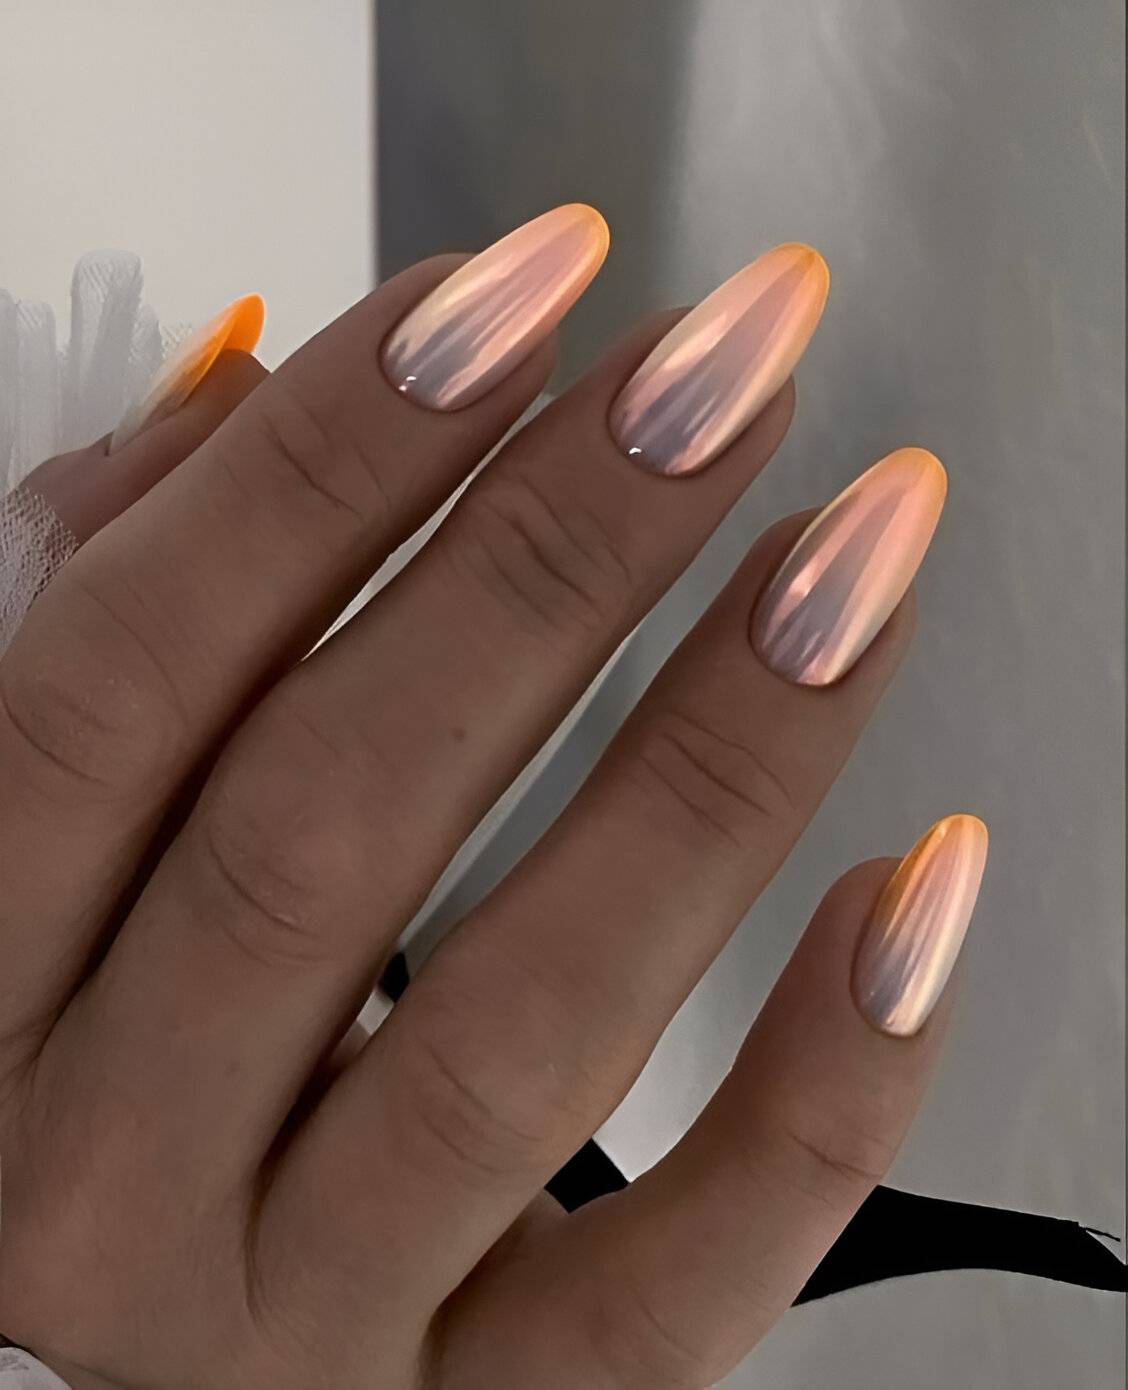 30 Chic Chrome Nail Designs For The Ultimate Glam Look - 233